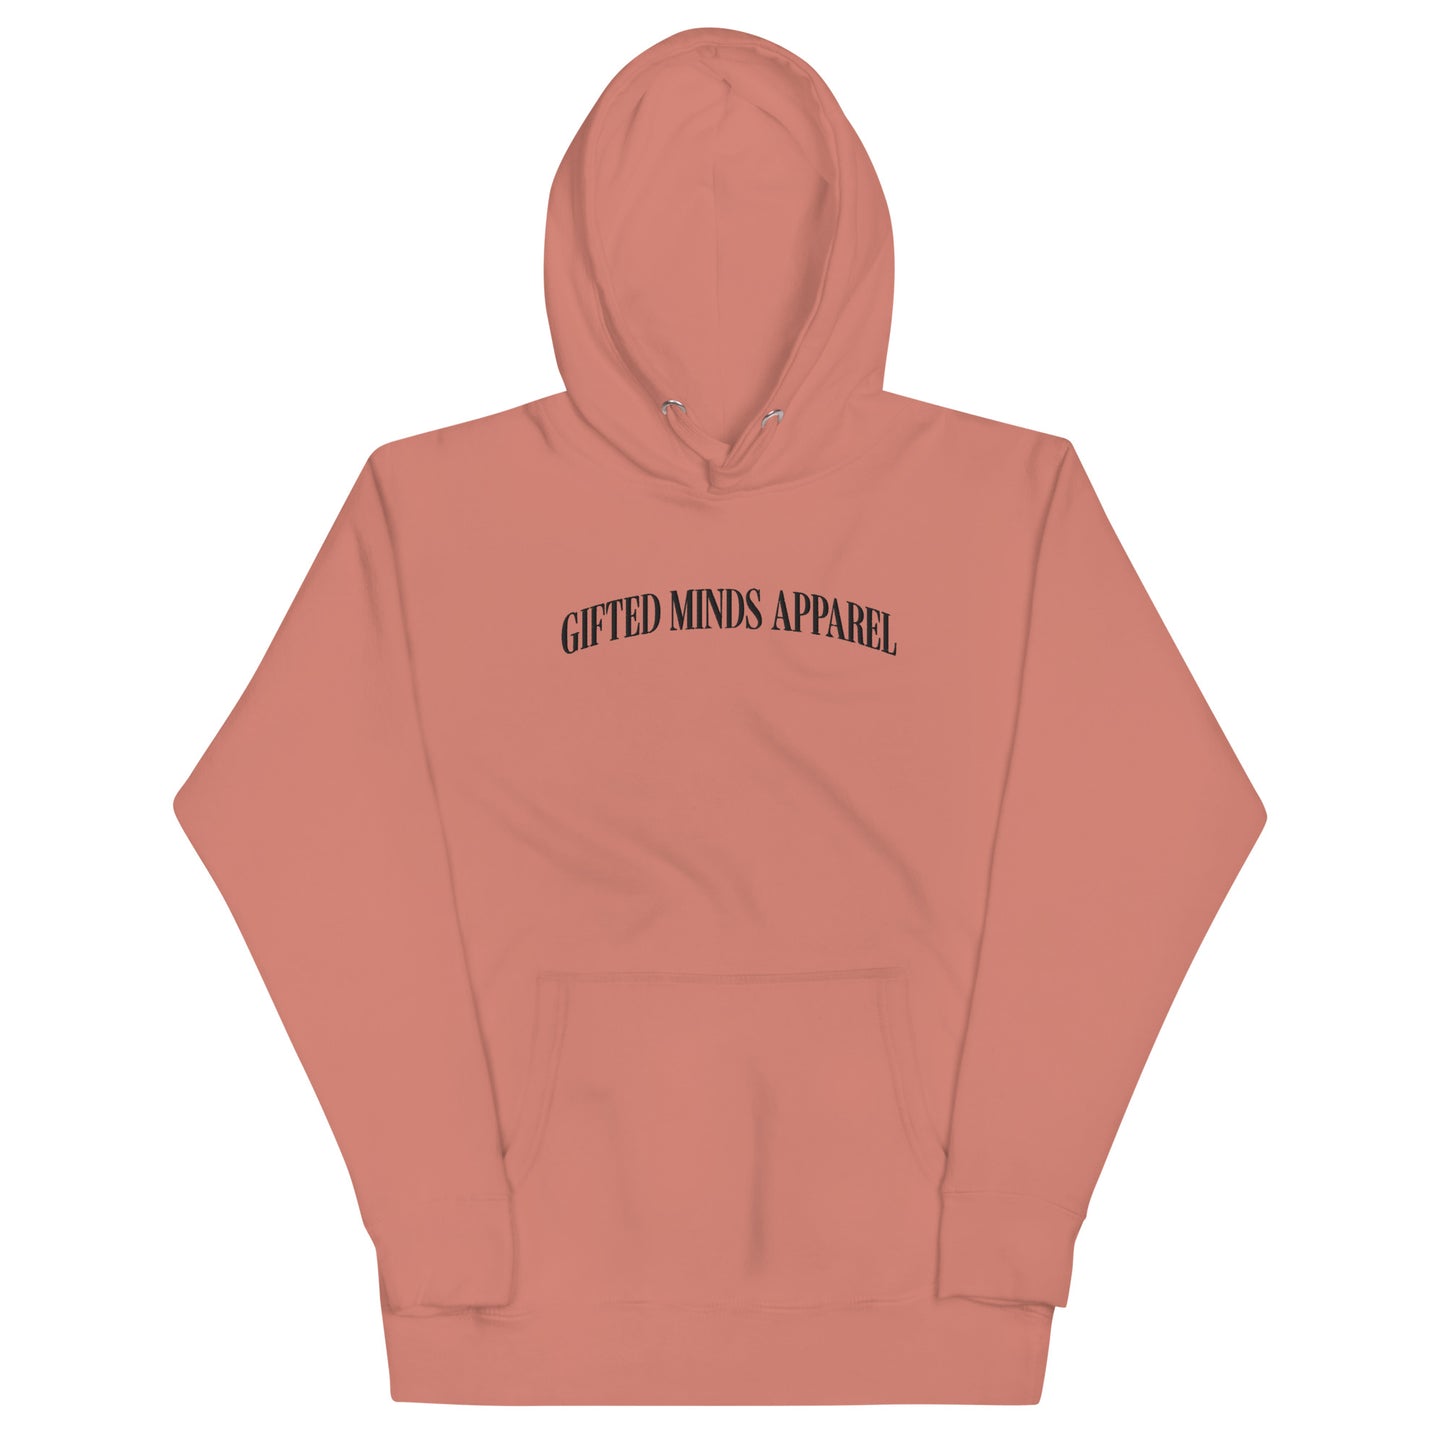 Gifted Minds Apparel Arched Embroidered Hoodie - GFTD MNDS